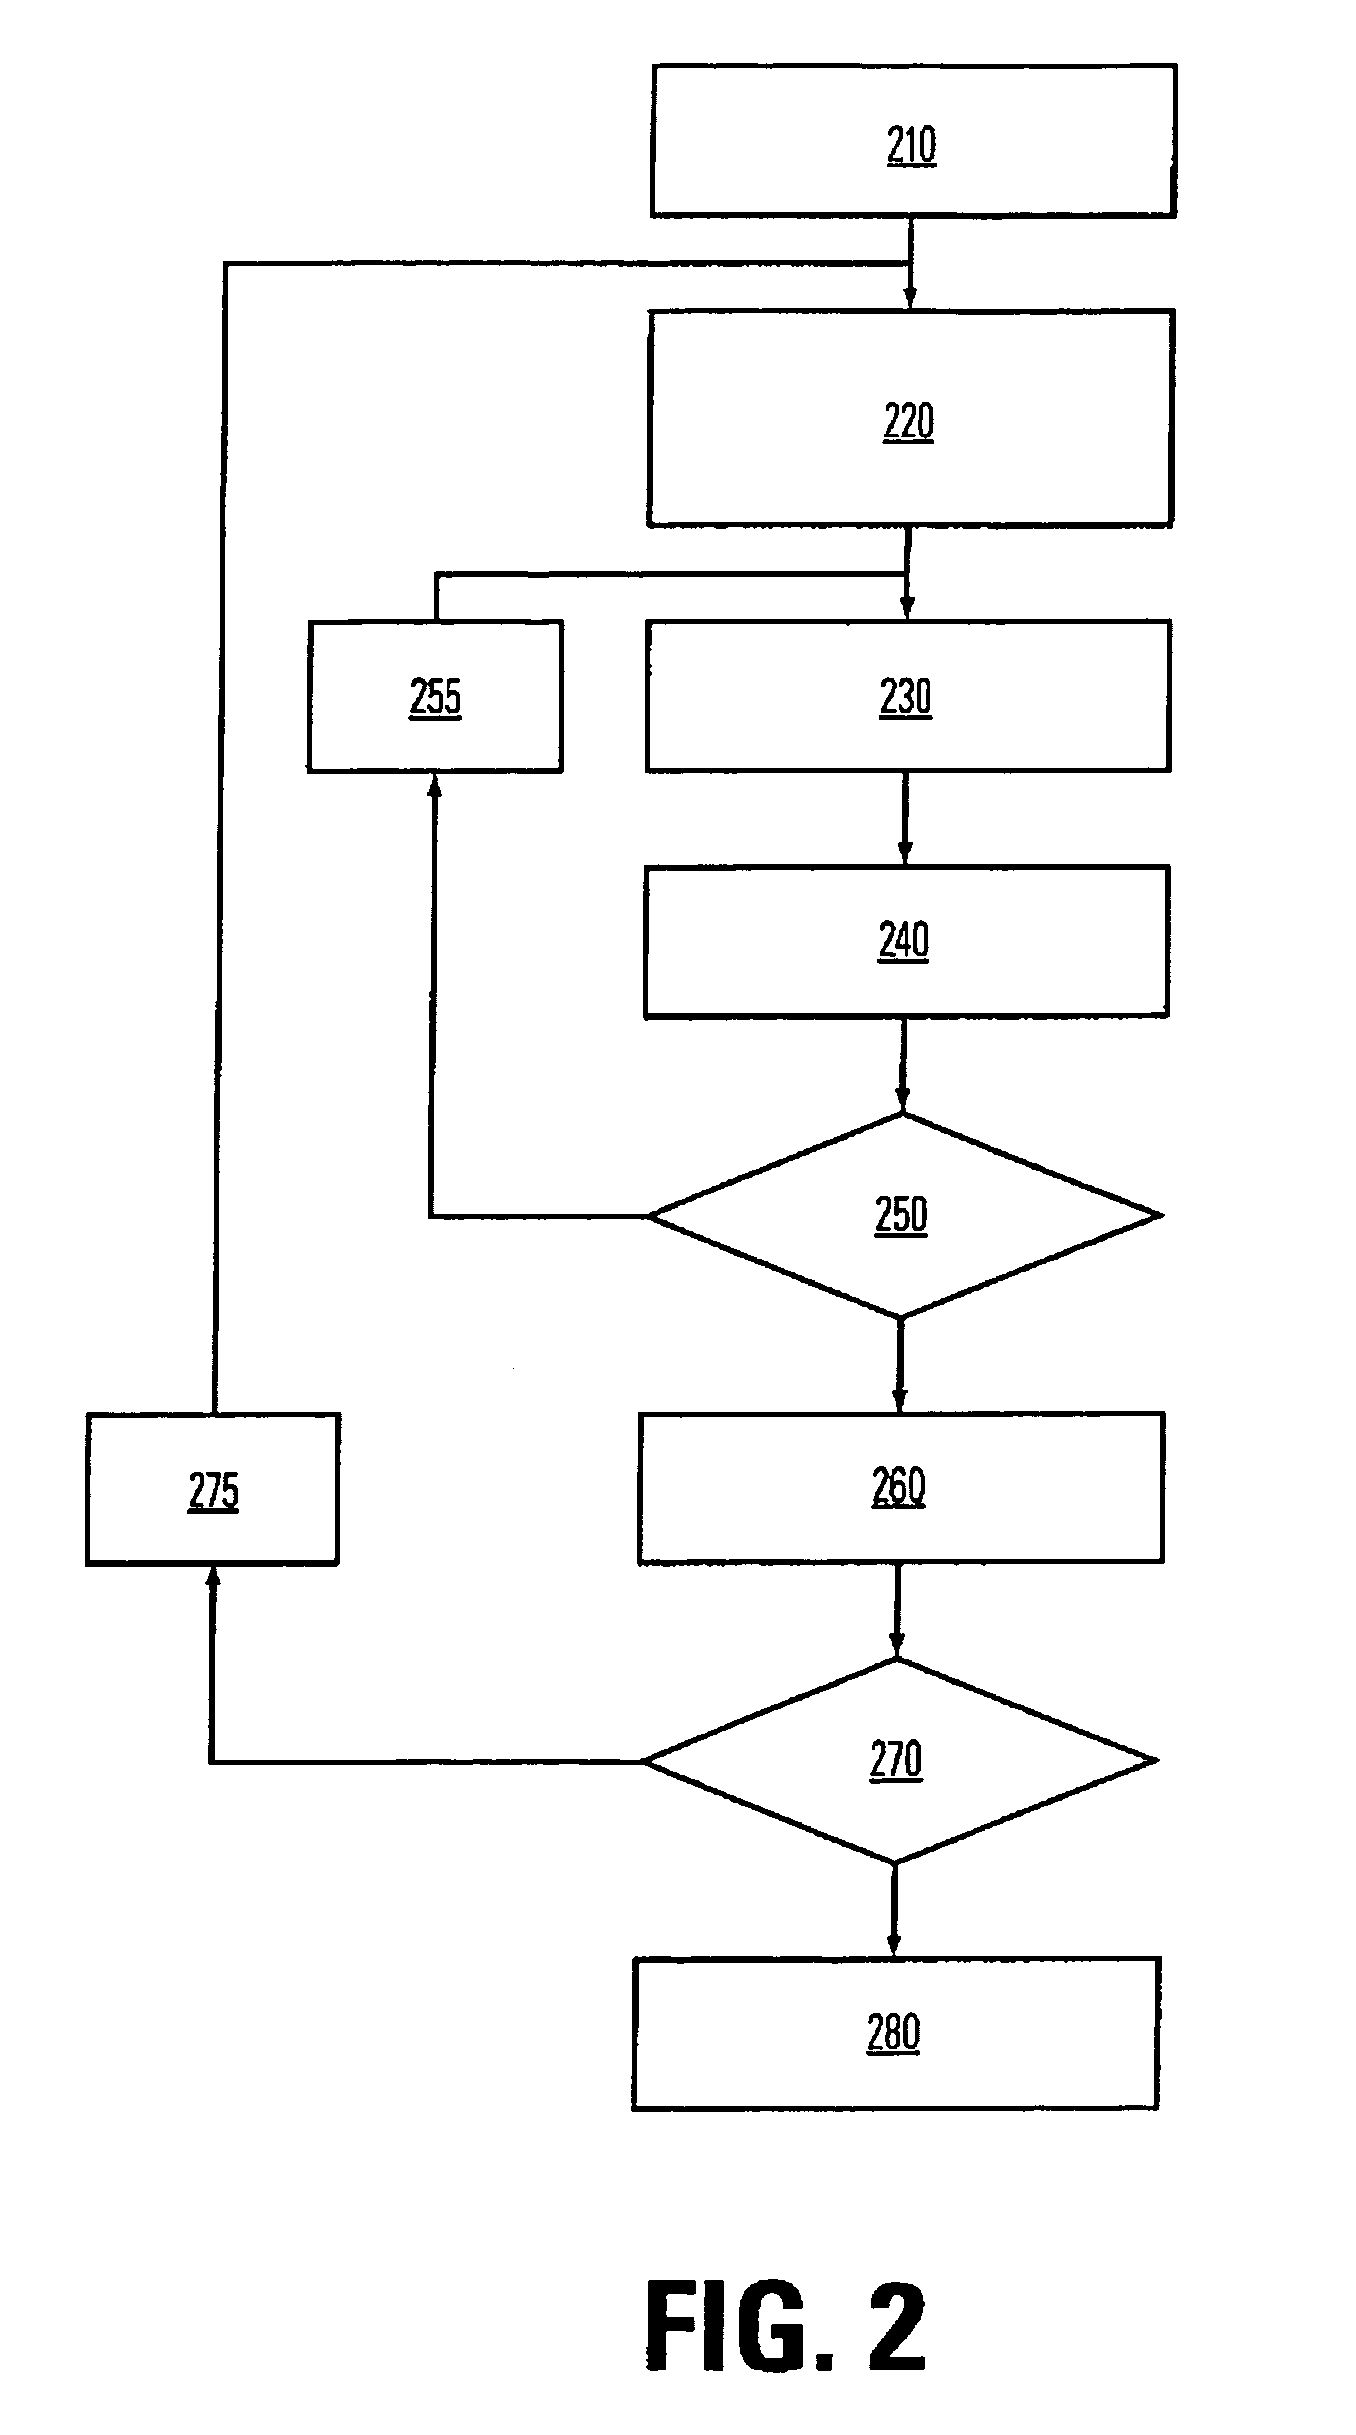 Method to detect a defective element